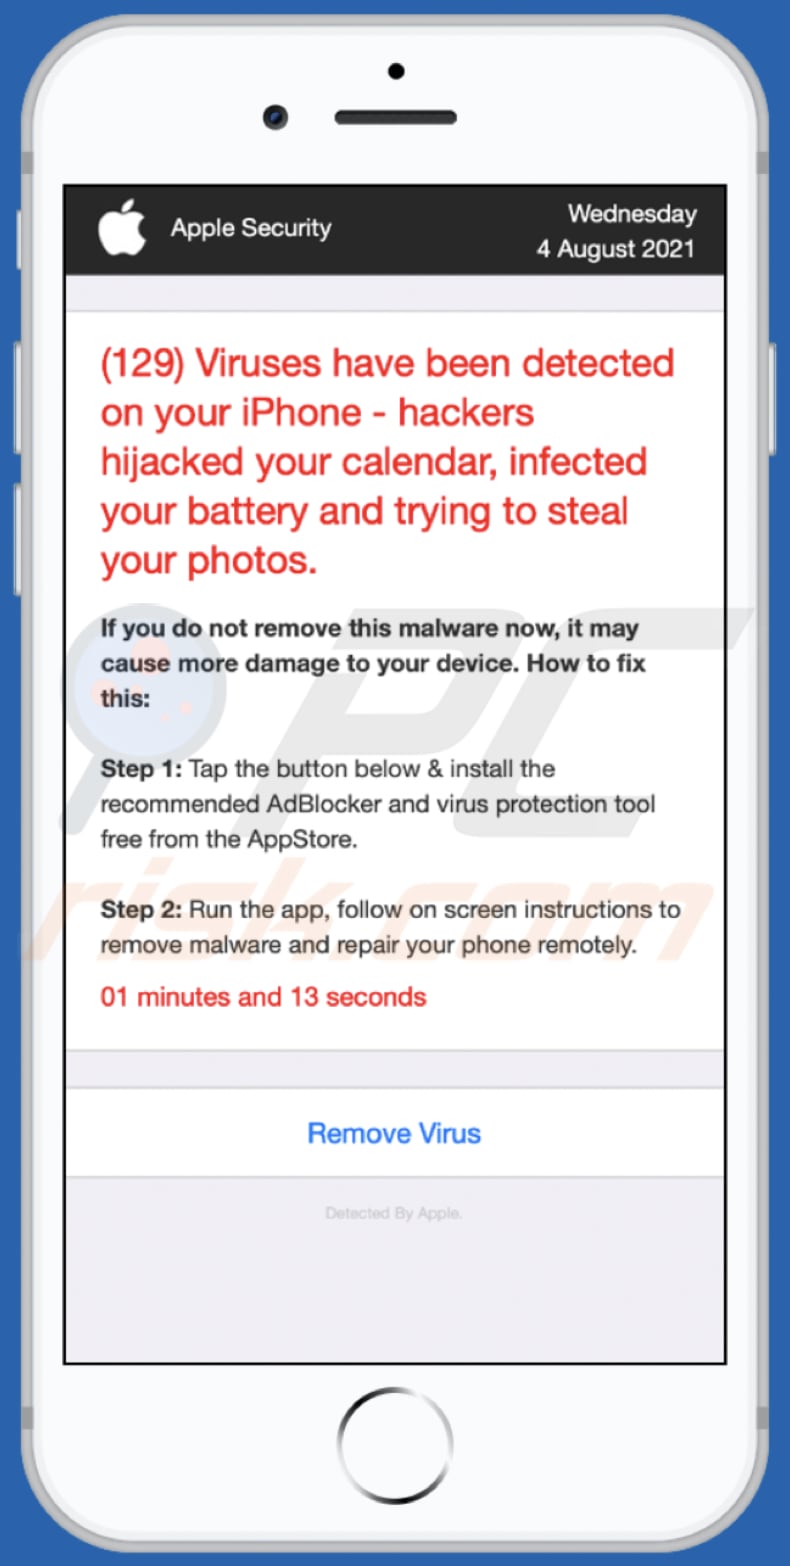 Strona w tle oszustwa pop-up hackers hijacked your calendar infected your battery